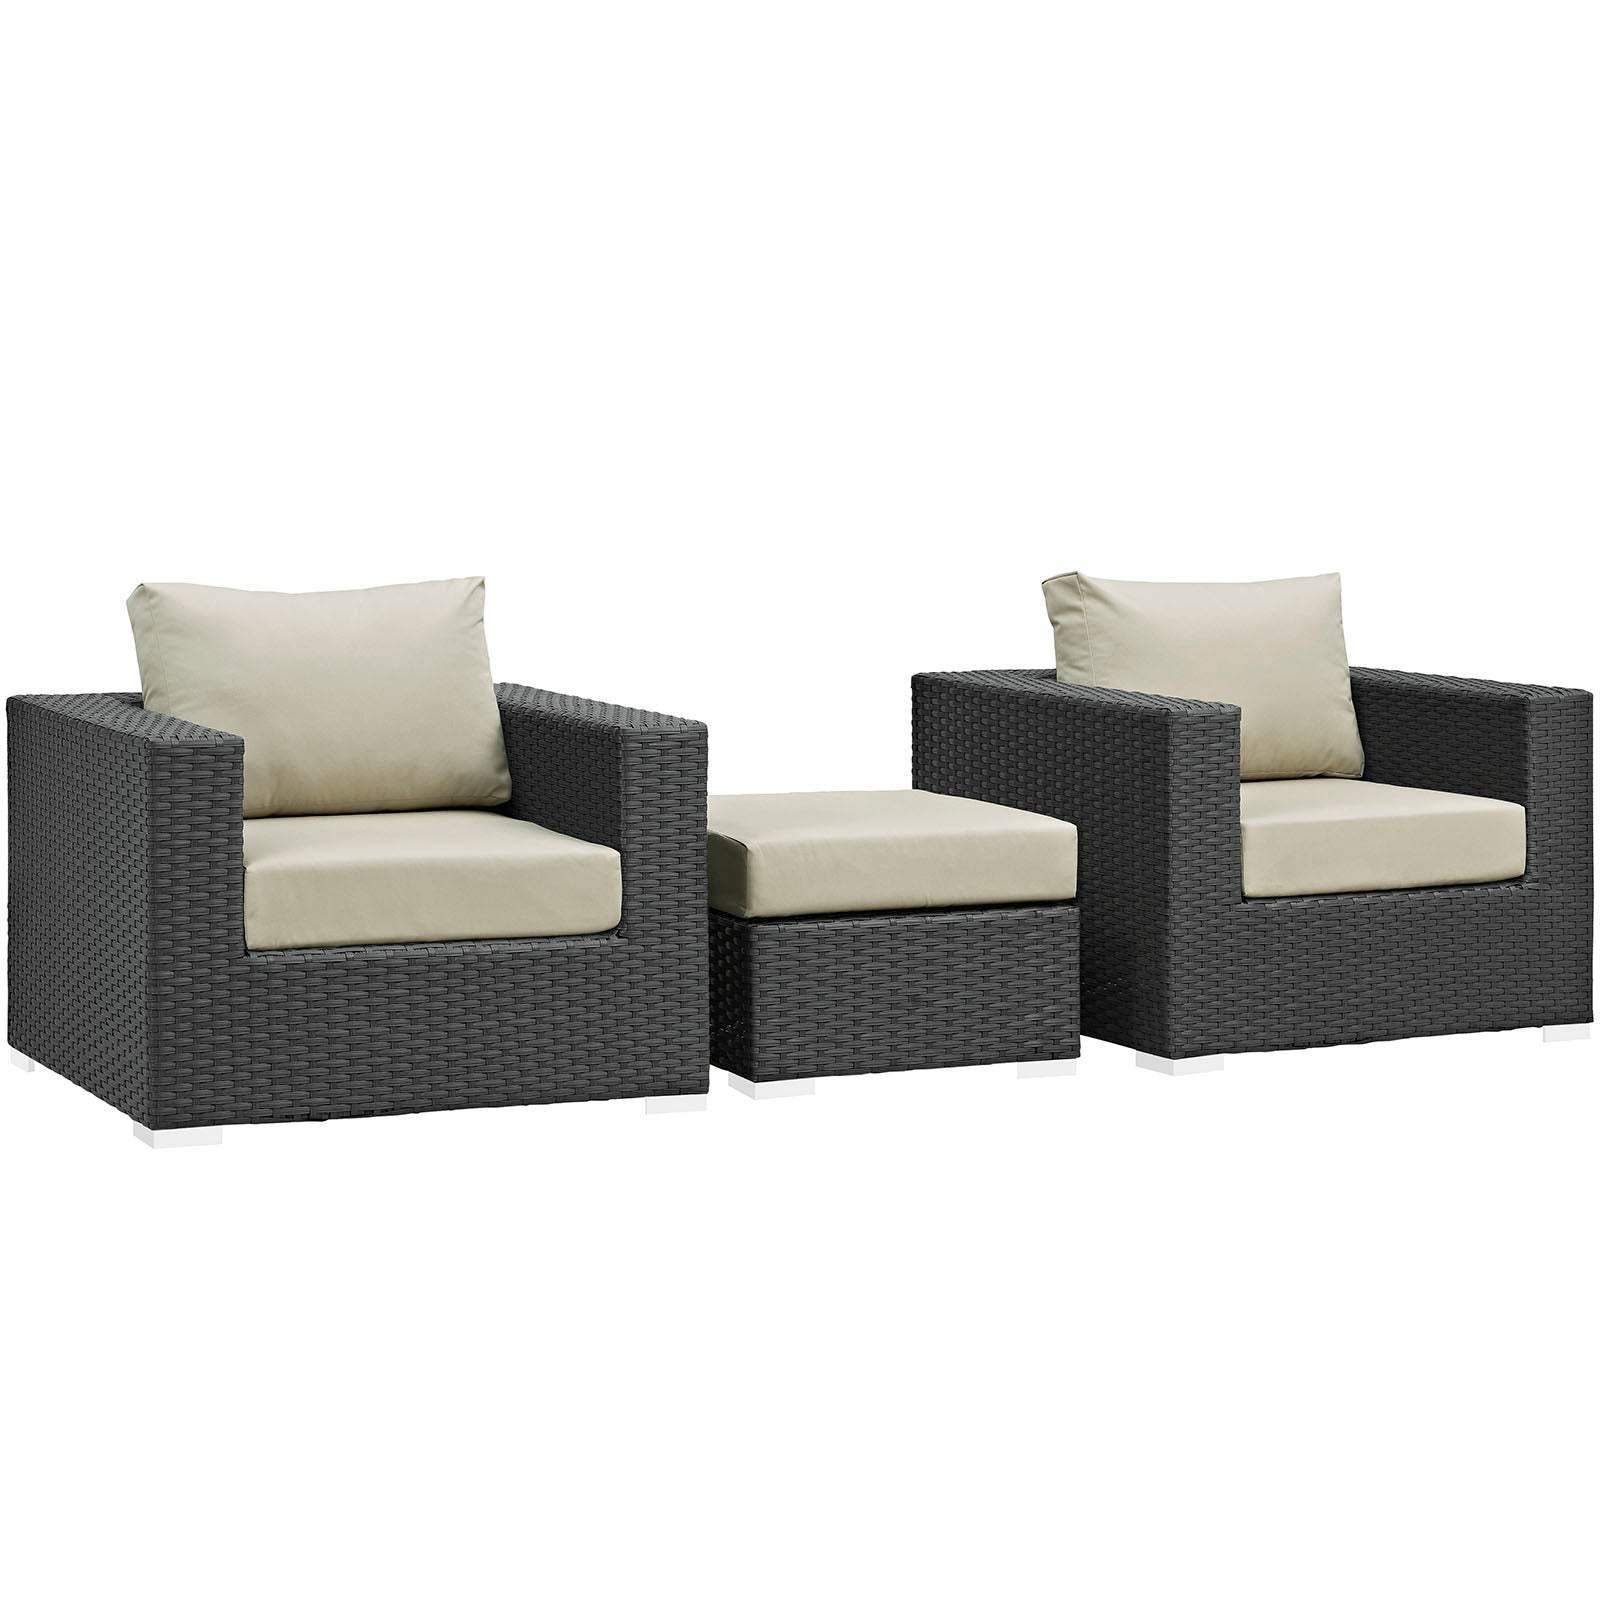 Sojourn 3 Piece 2 Seater Outdoor Patio Sunbrella Sectional Set With Ottoman